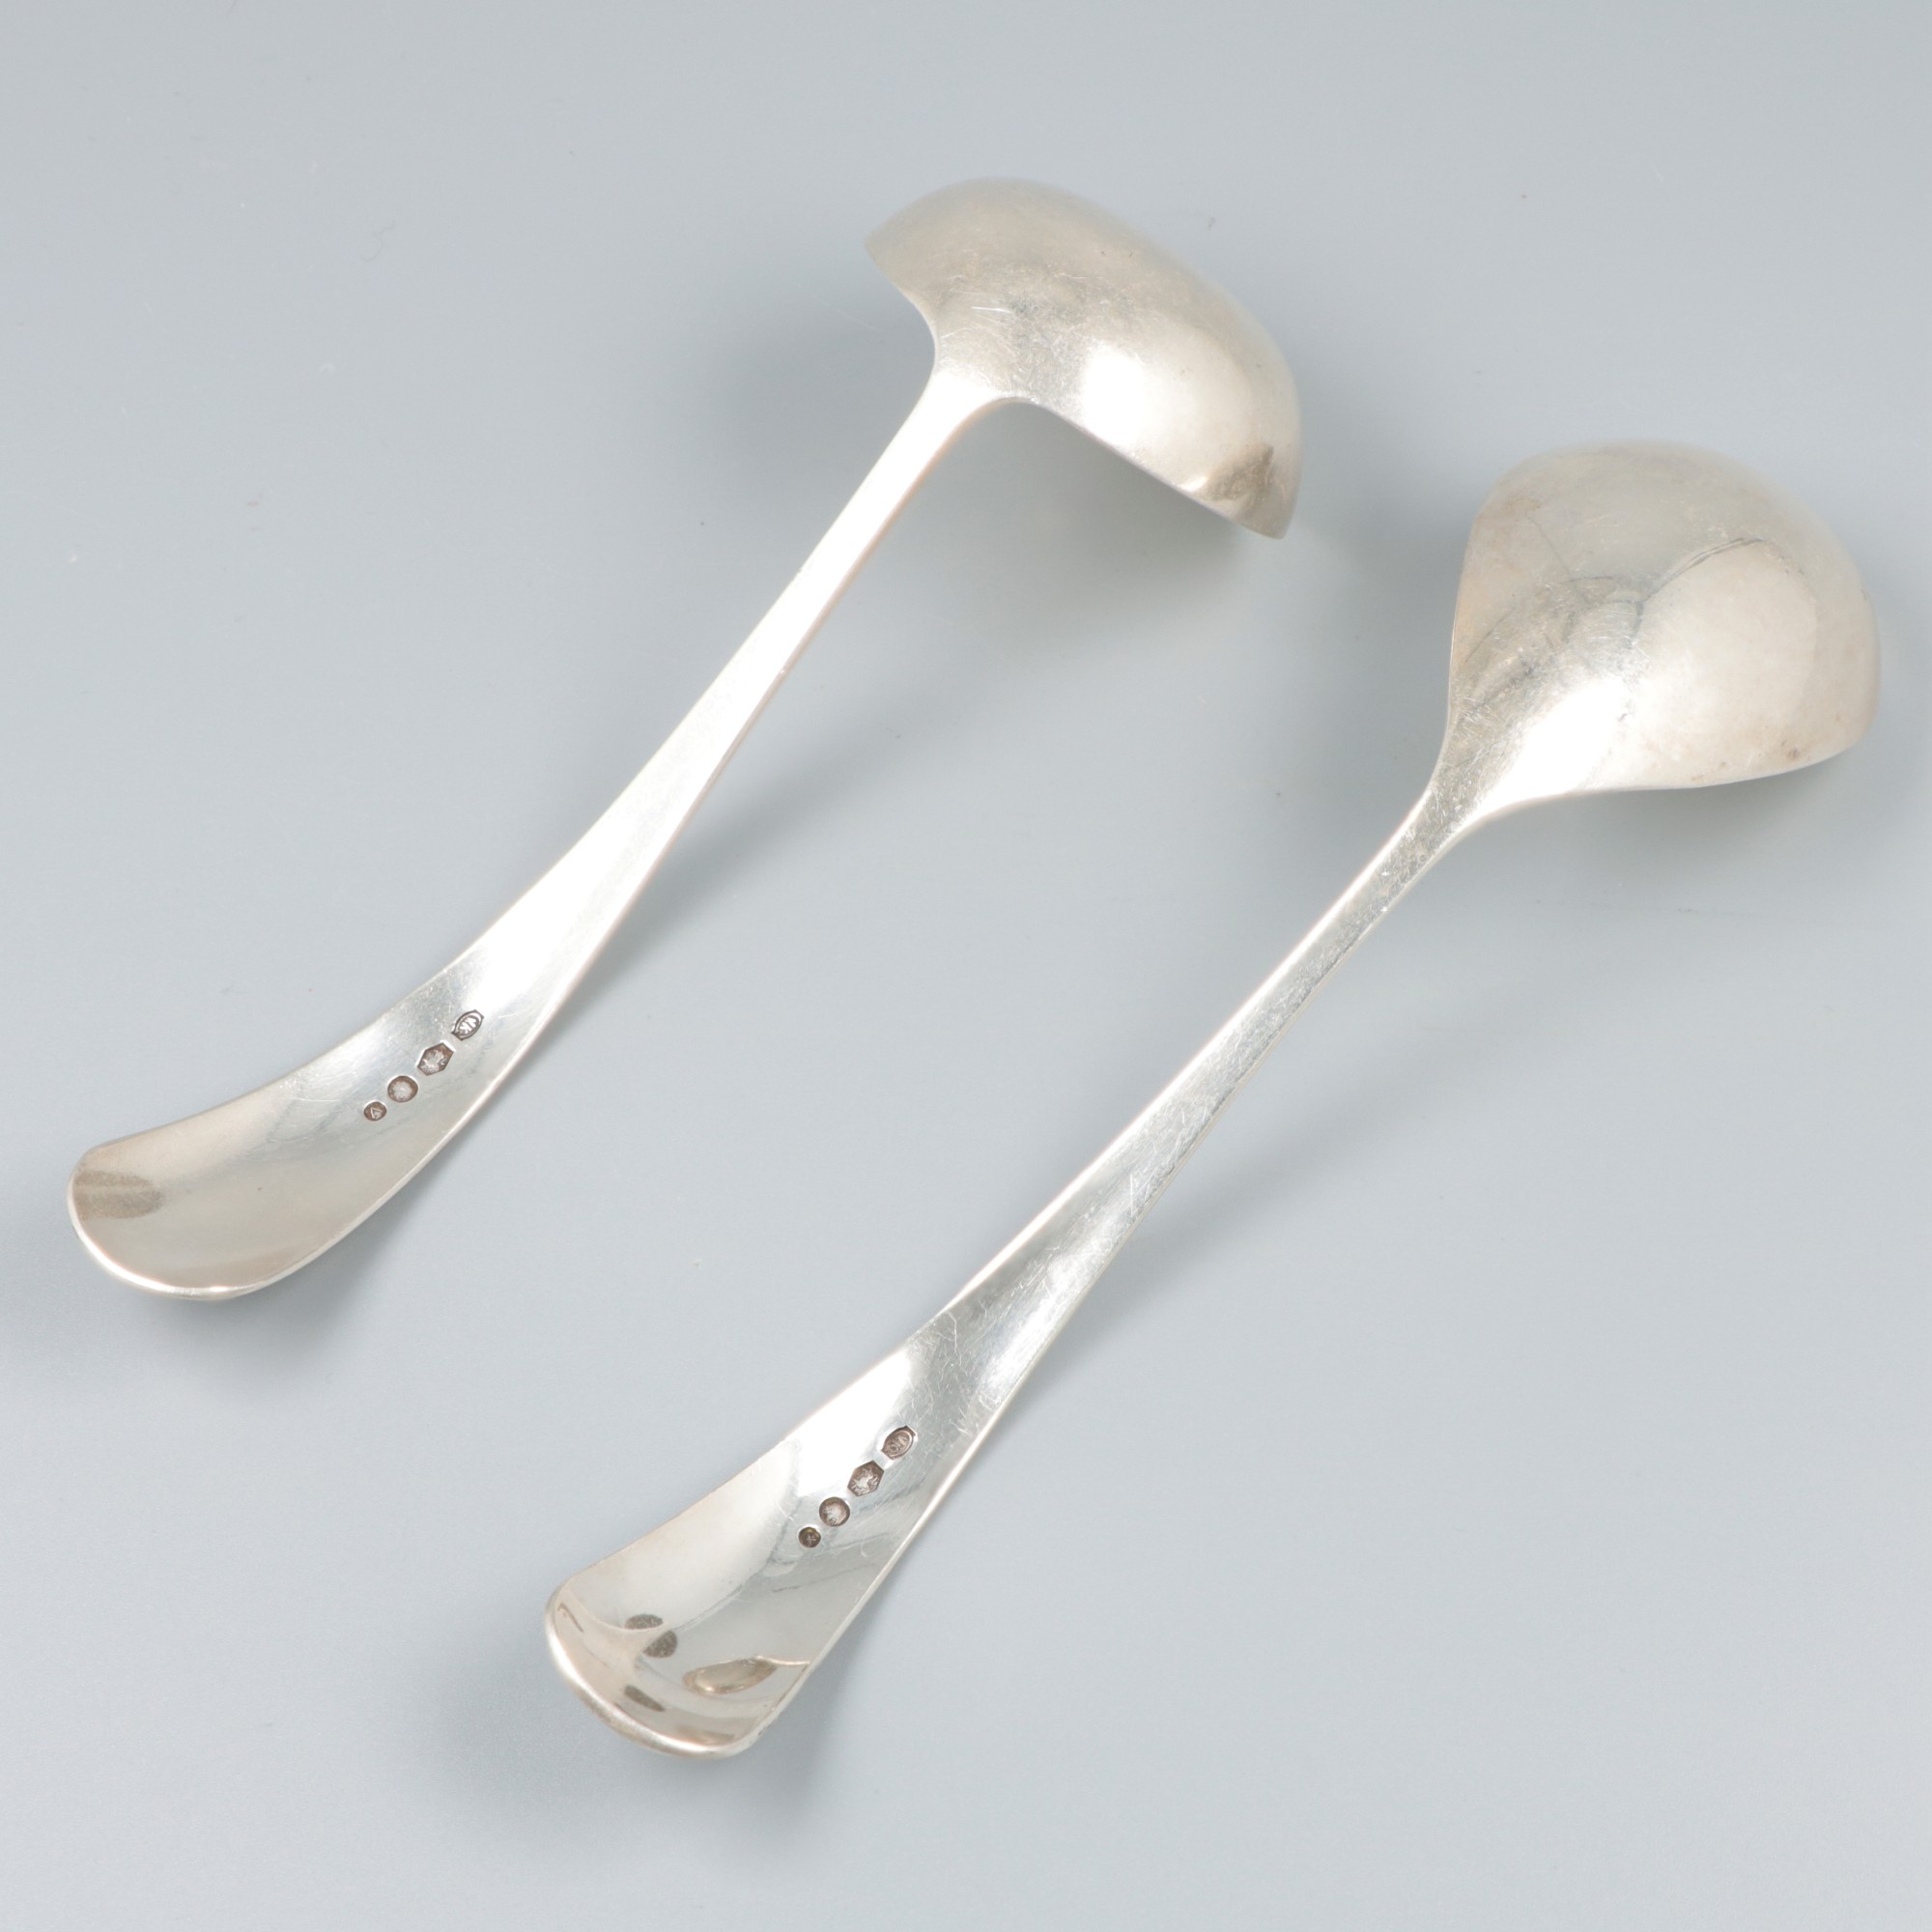 Sauce spoon & compote spoon "Haags Lofje", silver. - Image 4 of 5